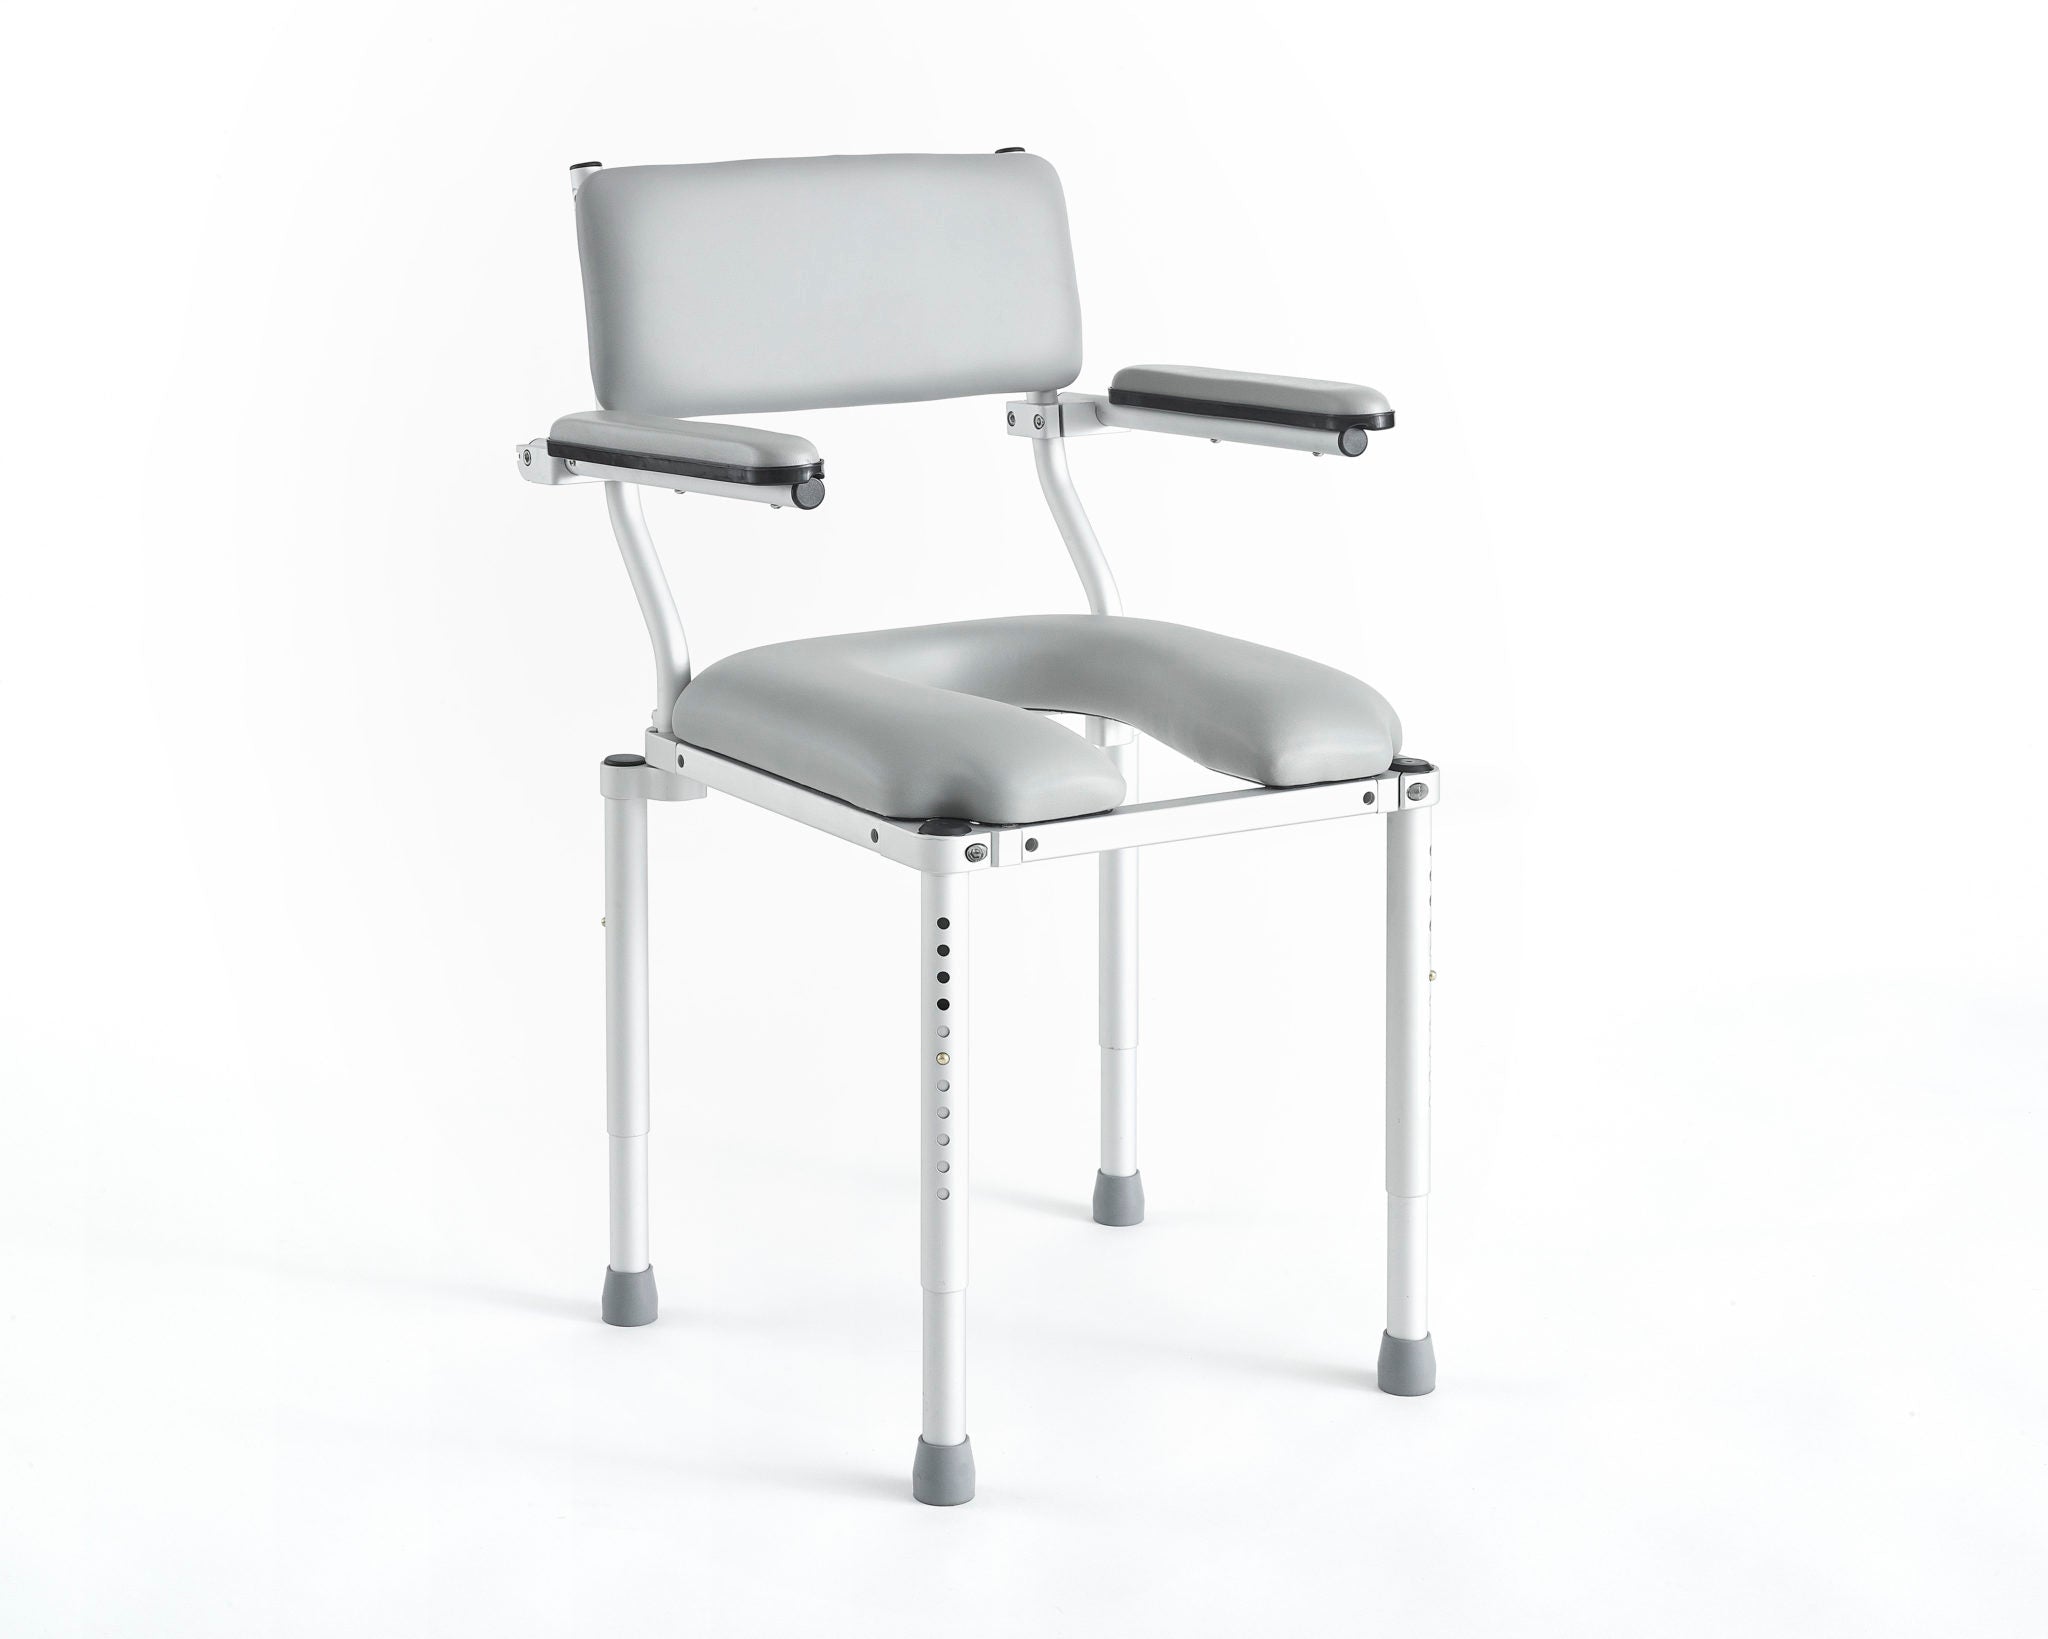 Nuprodx multiCHAIR 3000 Shower/Commode Chair